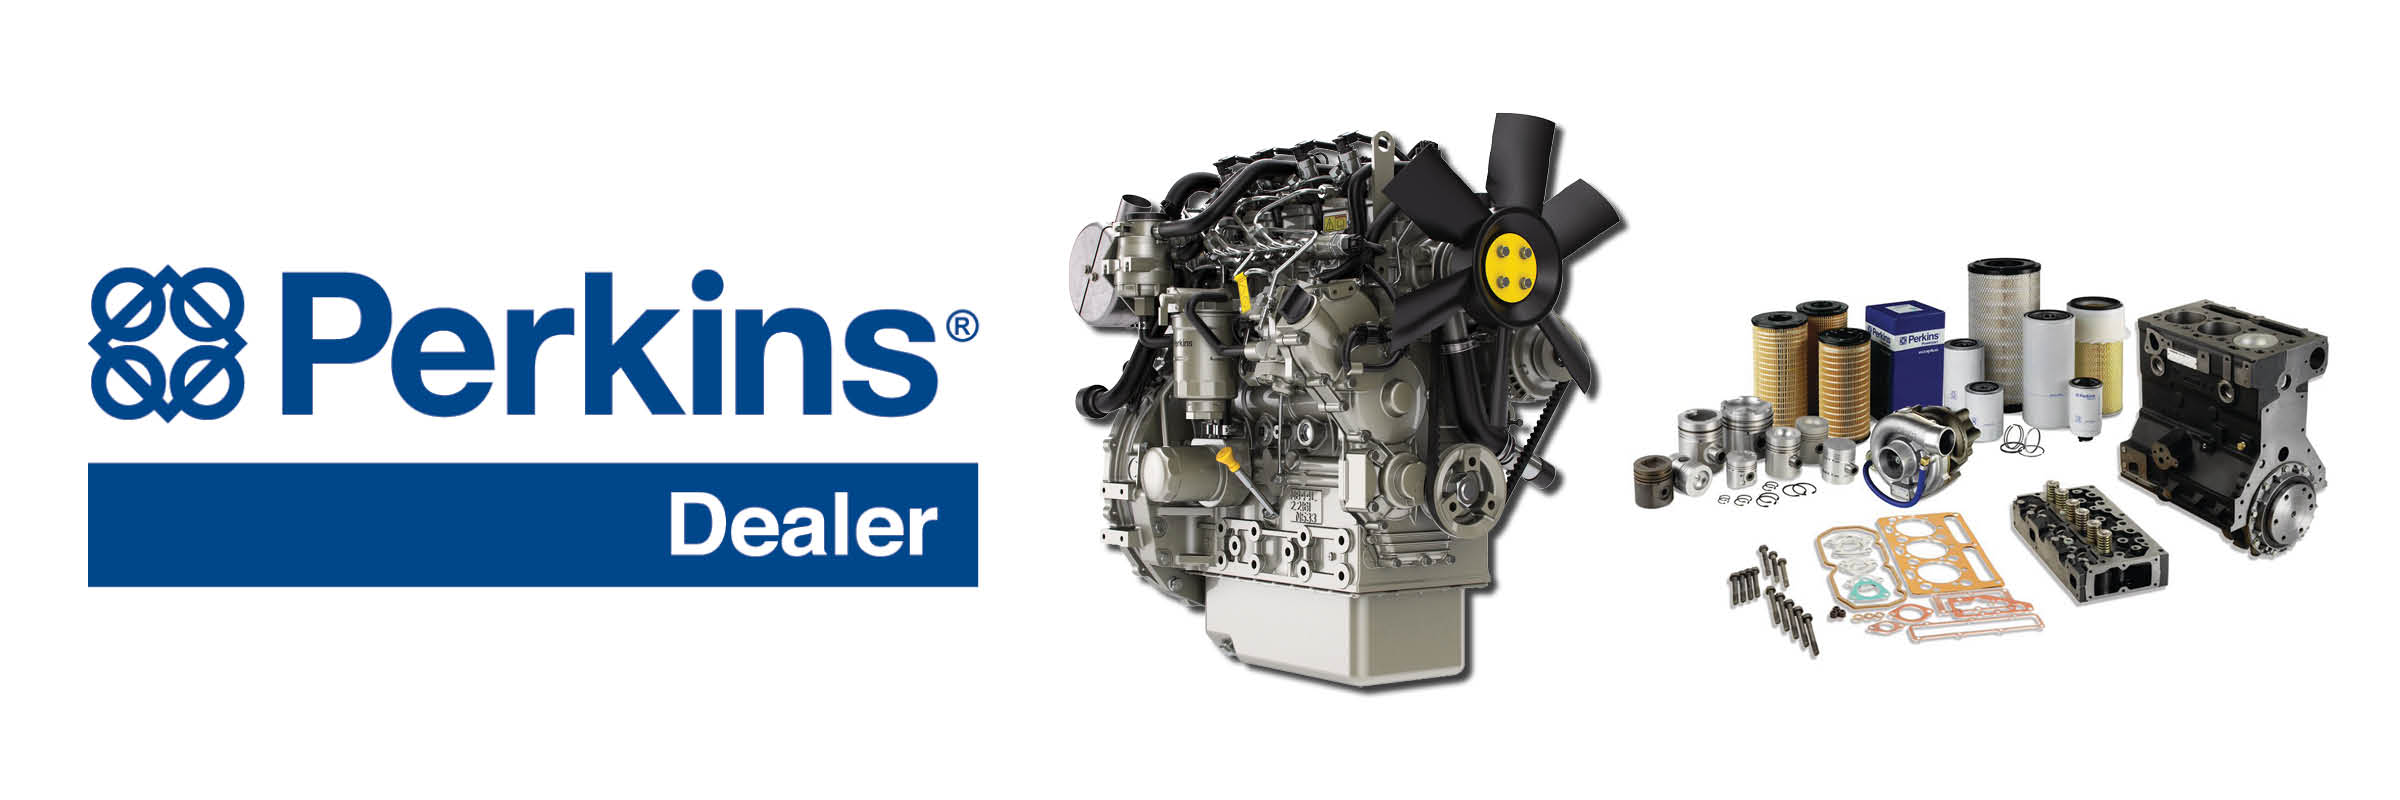 Perkins Dealer Engines and Genuine Spare Parts